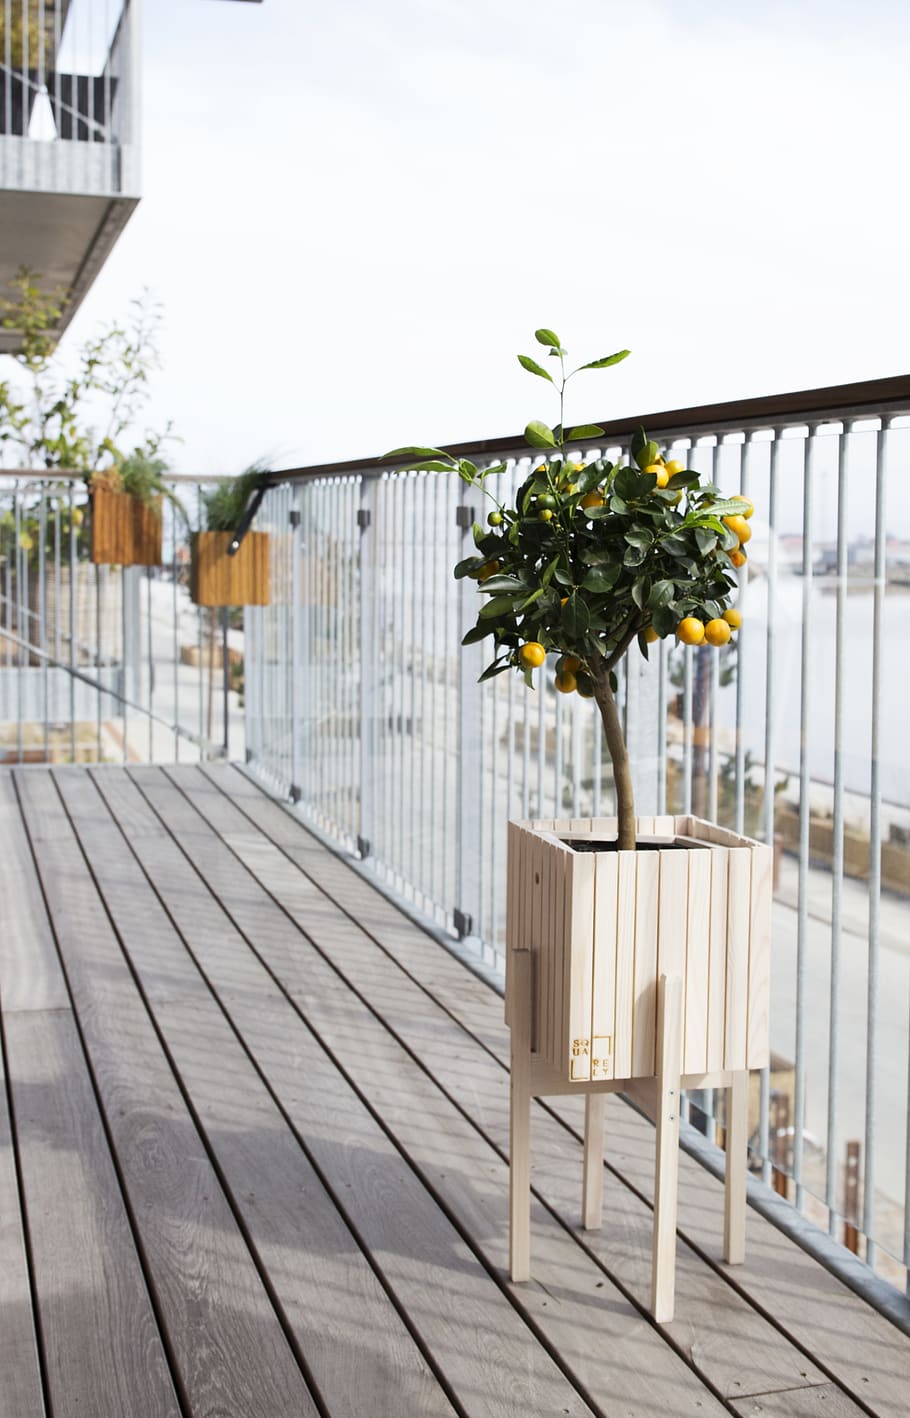 potted kumquat plant, nature, day, wood - material, no people